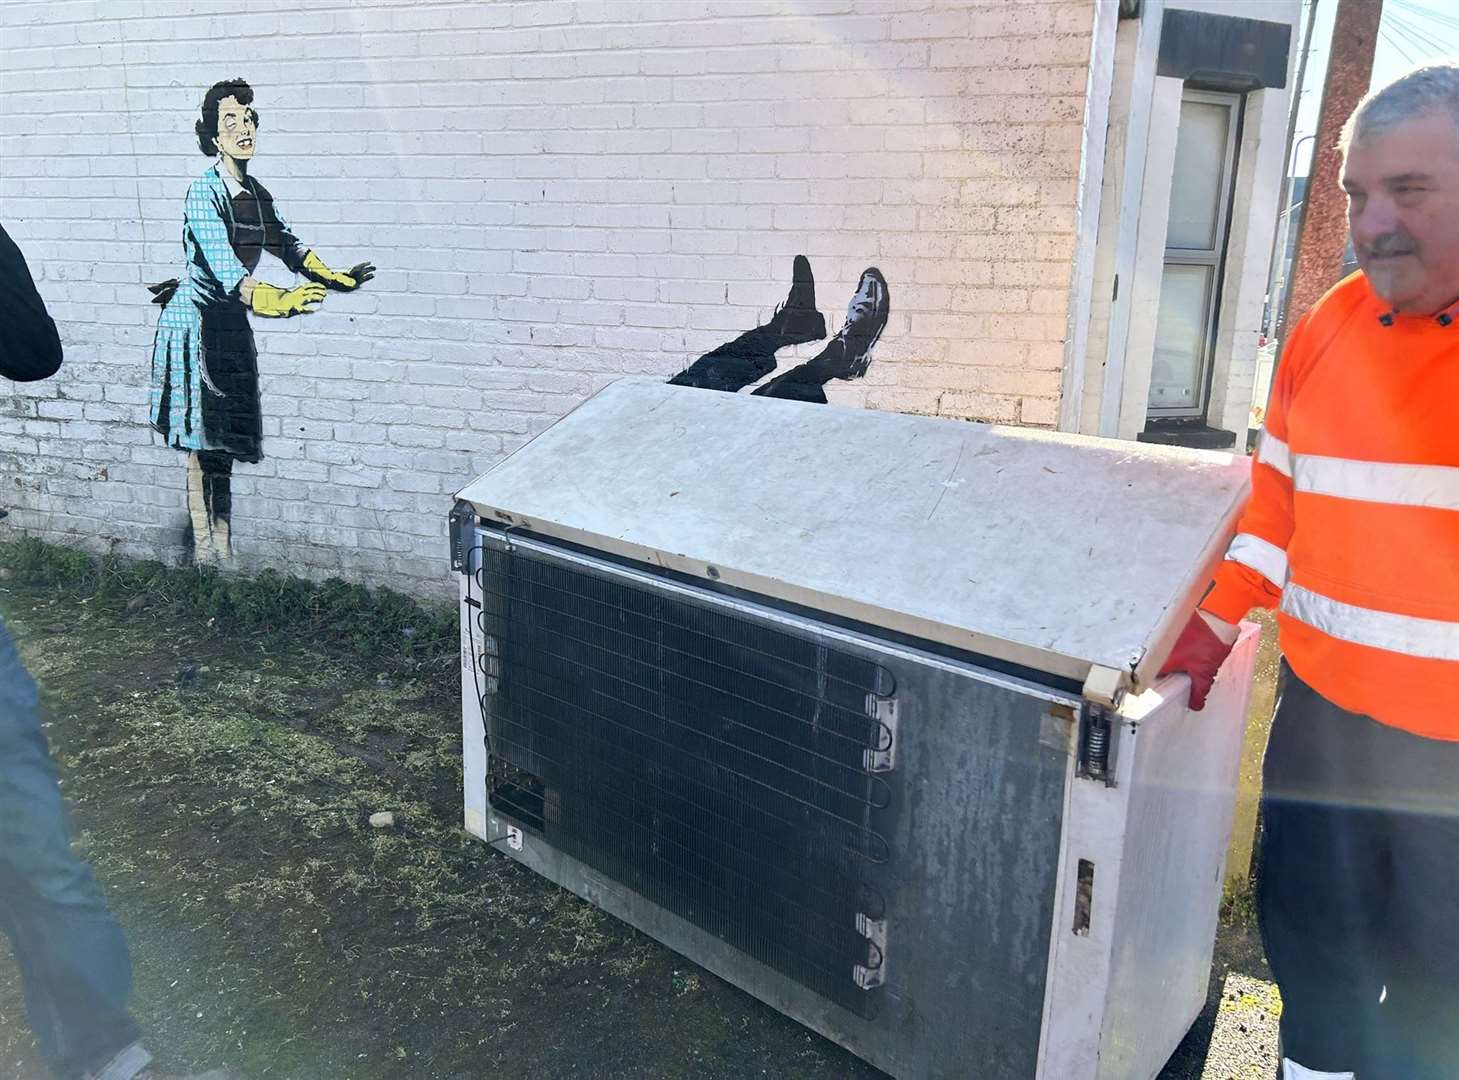 People wearing high-vis workwear in Margate removing a chest freezer which formed part of new artwork by street artist Banksy (@danbamhiggins/PA)